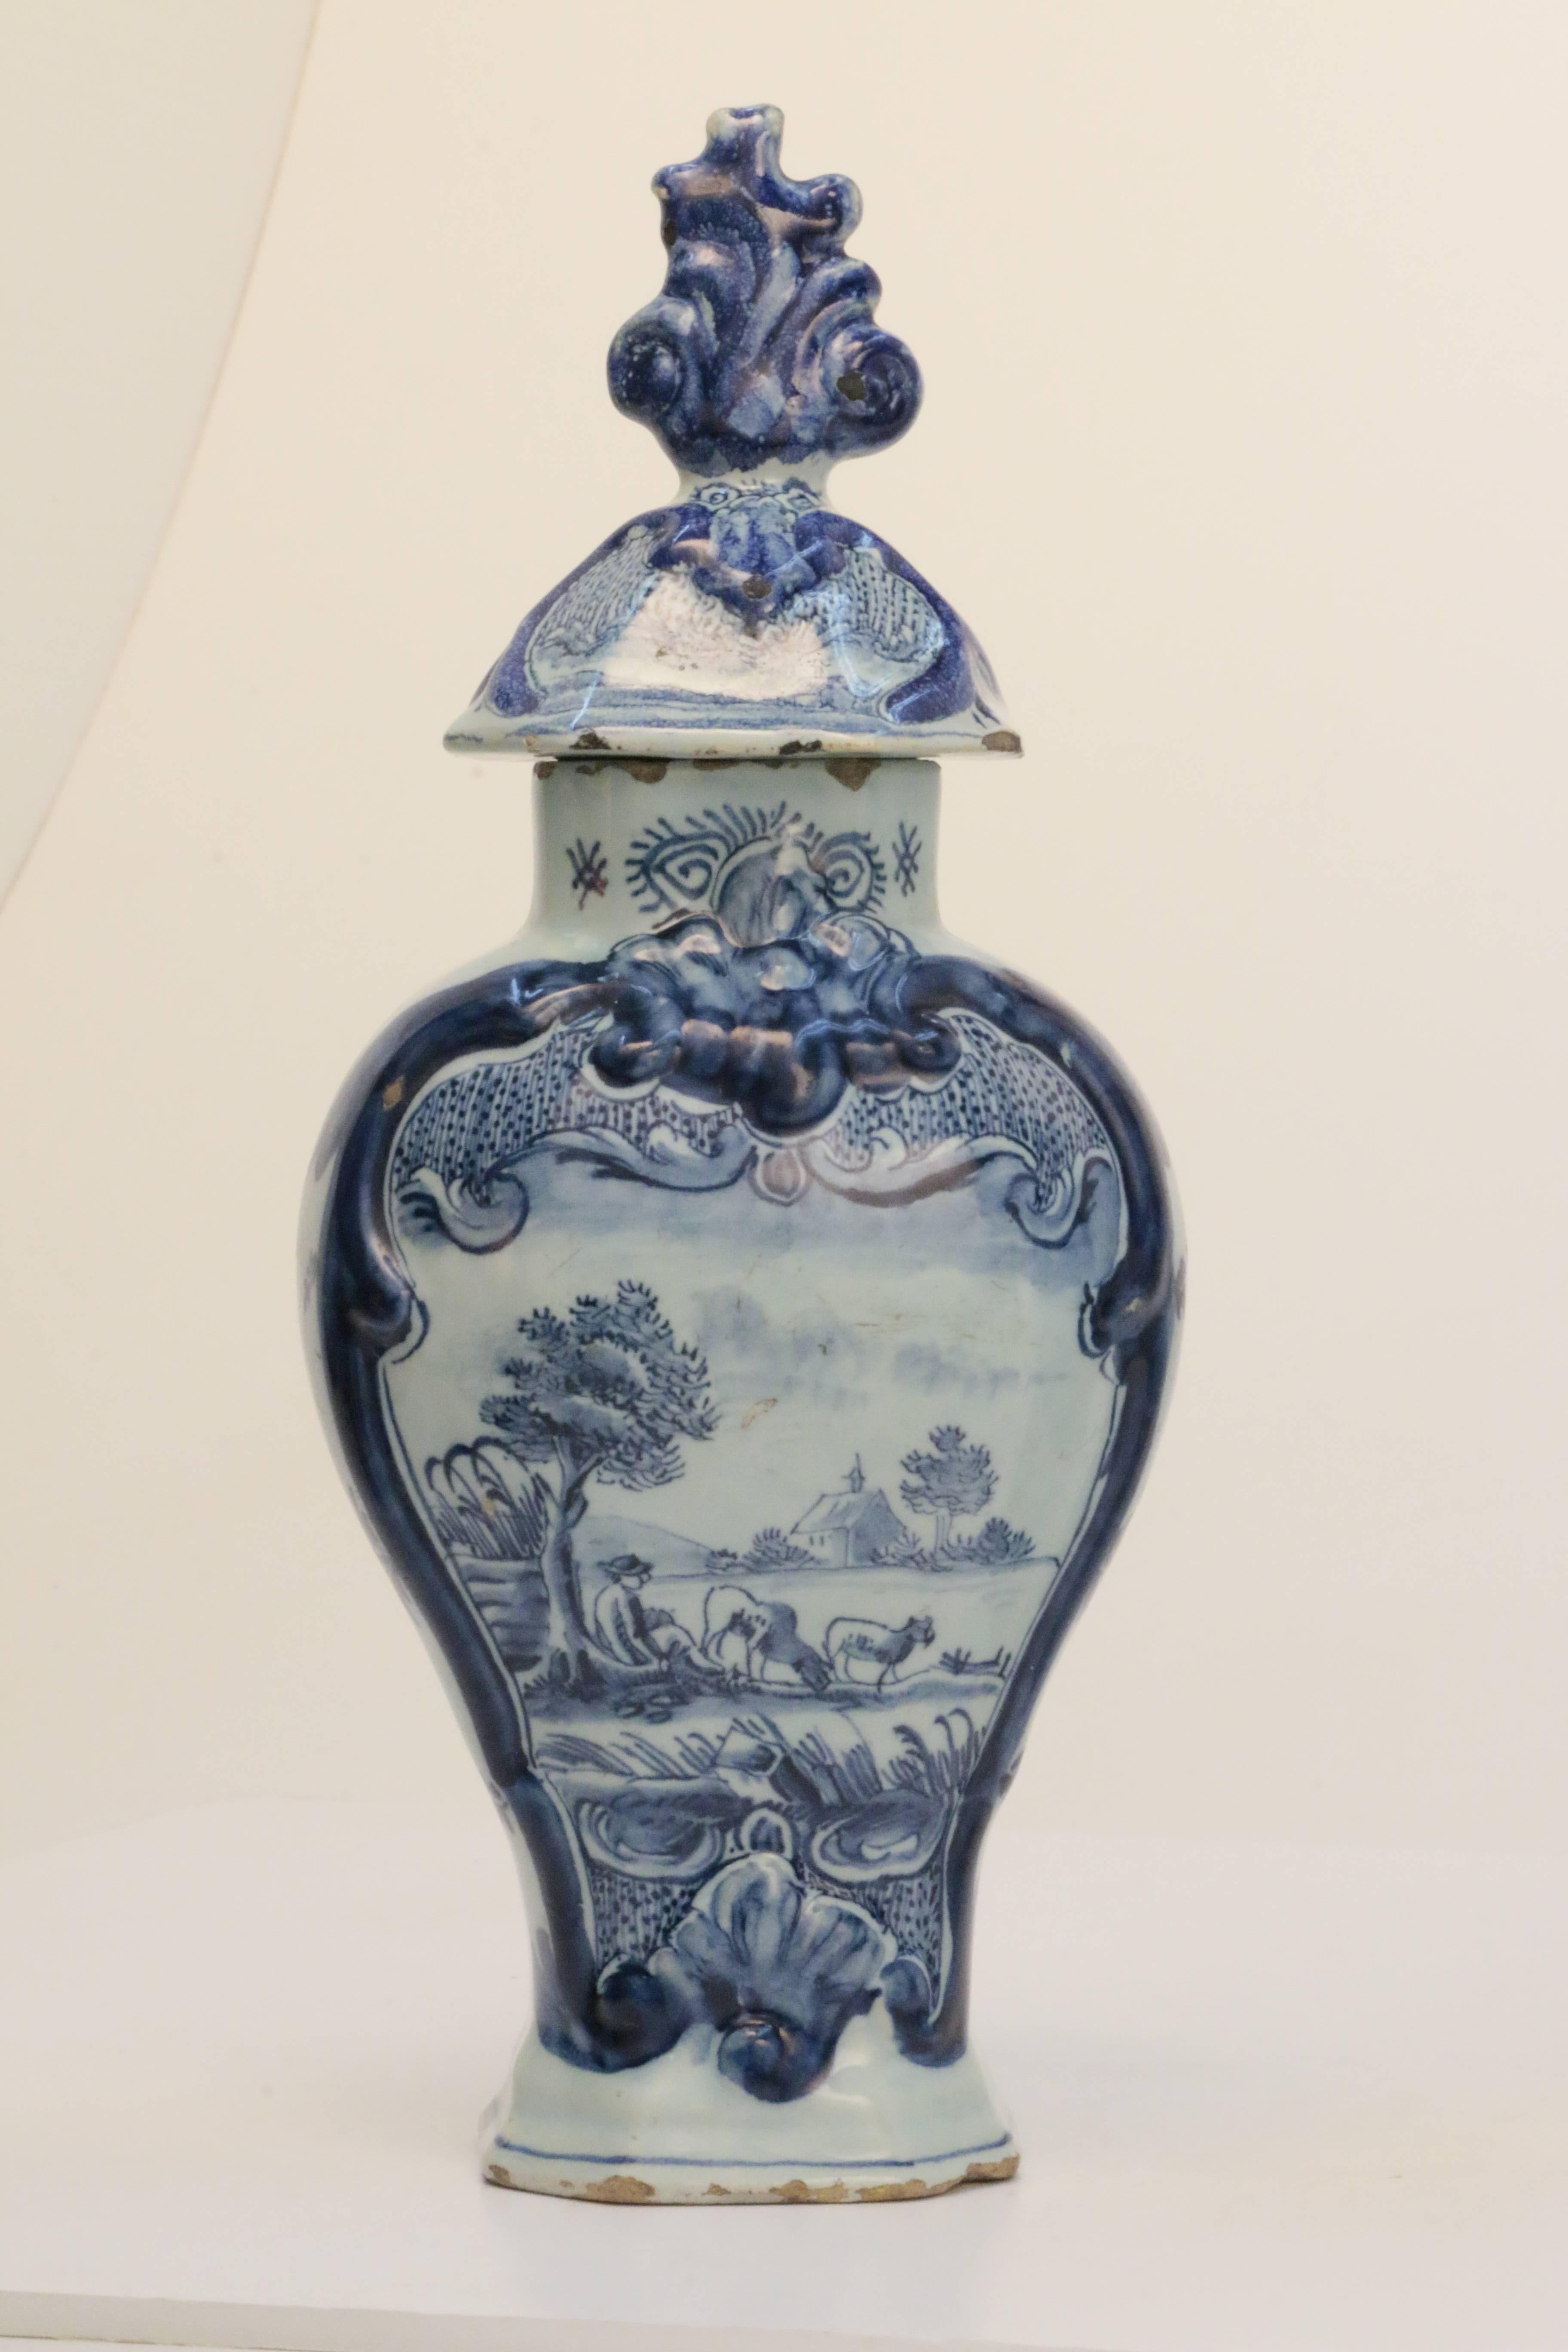 An attractive pair of 18th century Dutch Delft vases, each of molded ovoid paneled outlines, blue painted with a bucolic scene of cows in a pastoral landscape, with original covers with flame finials.

These vases are a Classic example of their